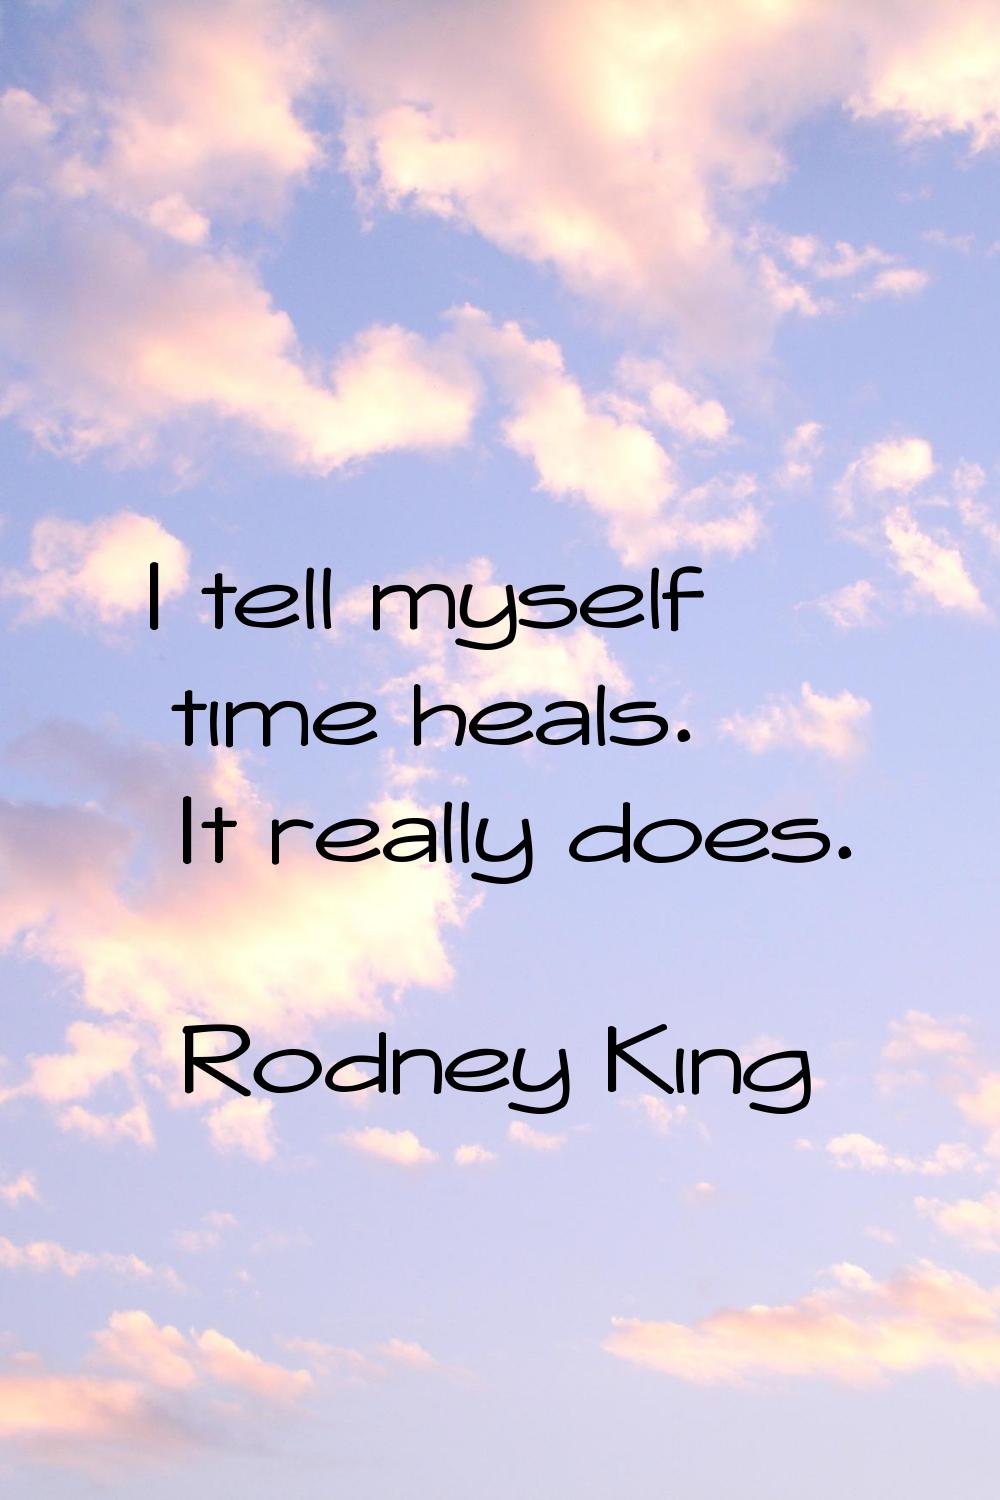 I tell myself time heals. It really does.